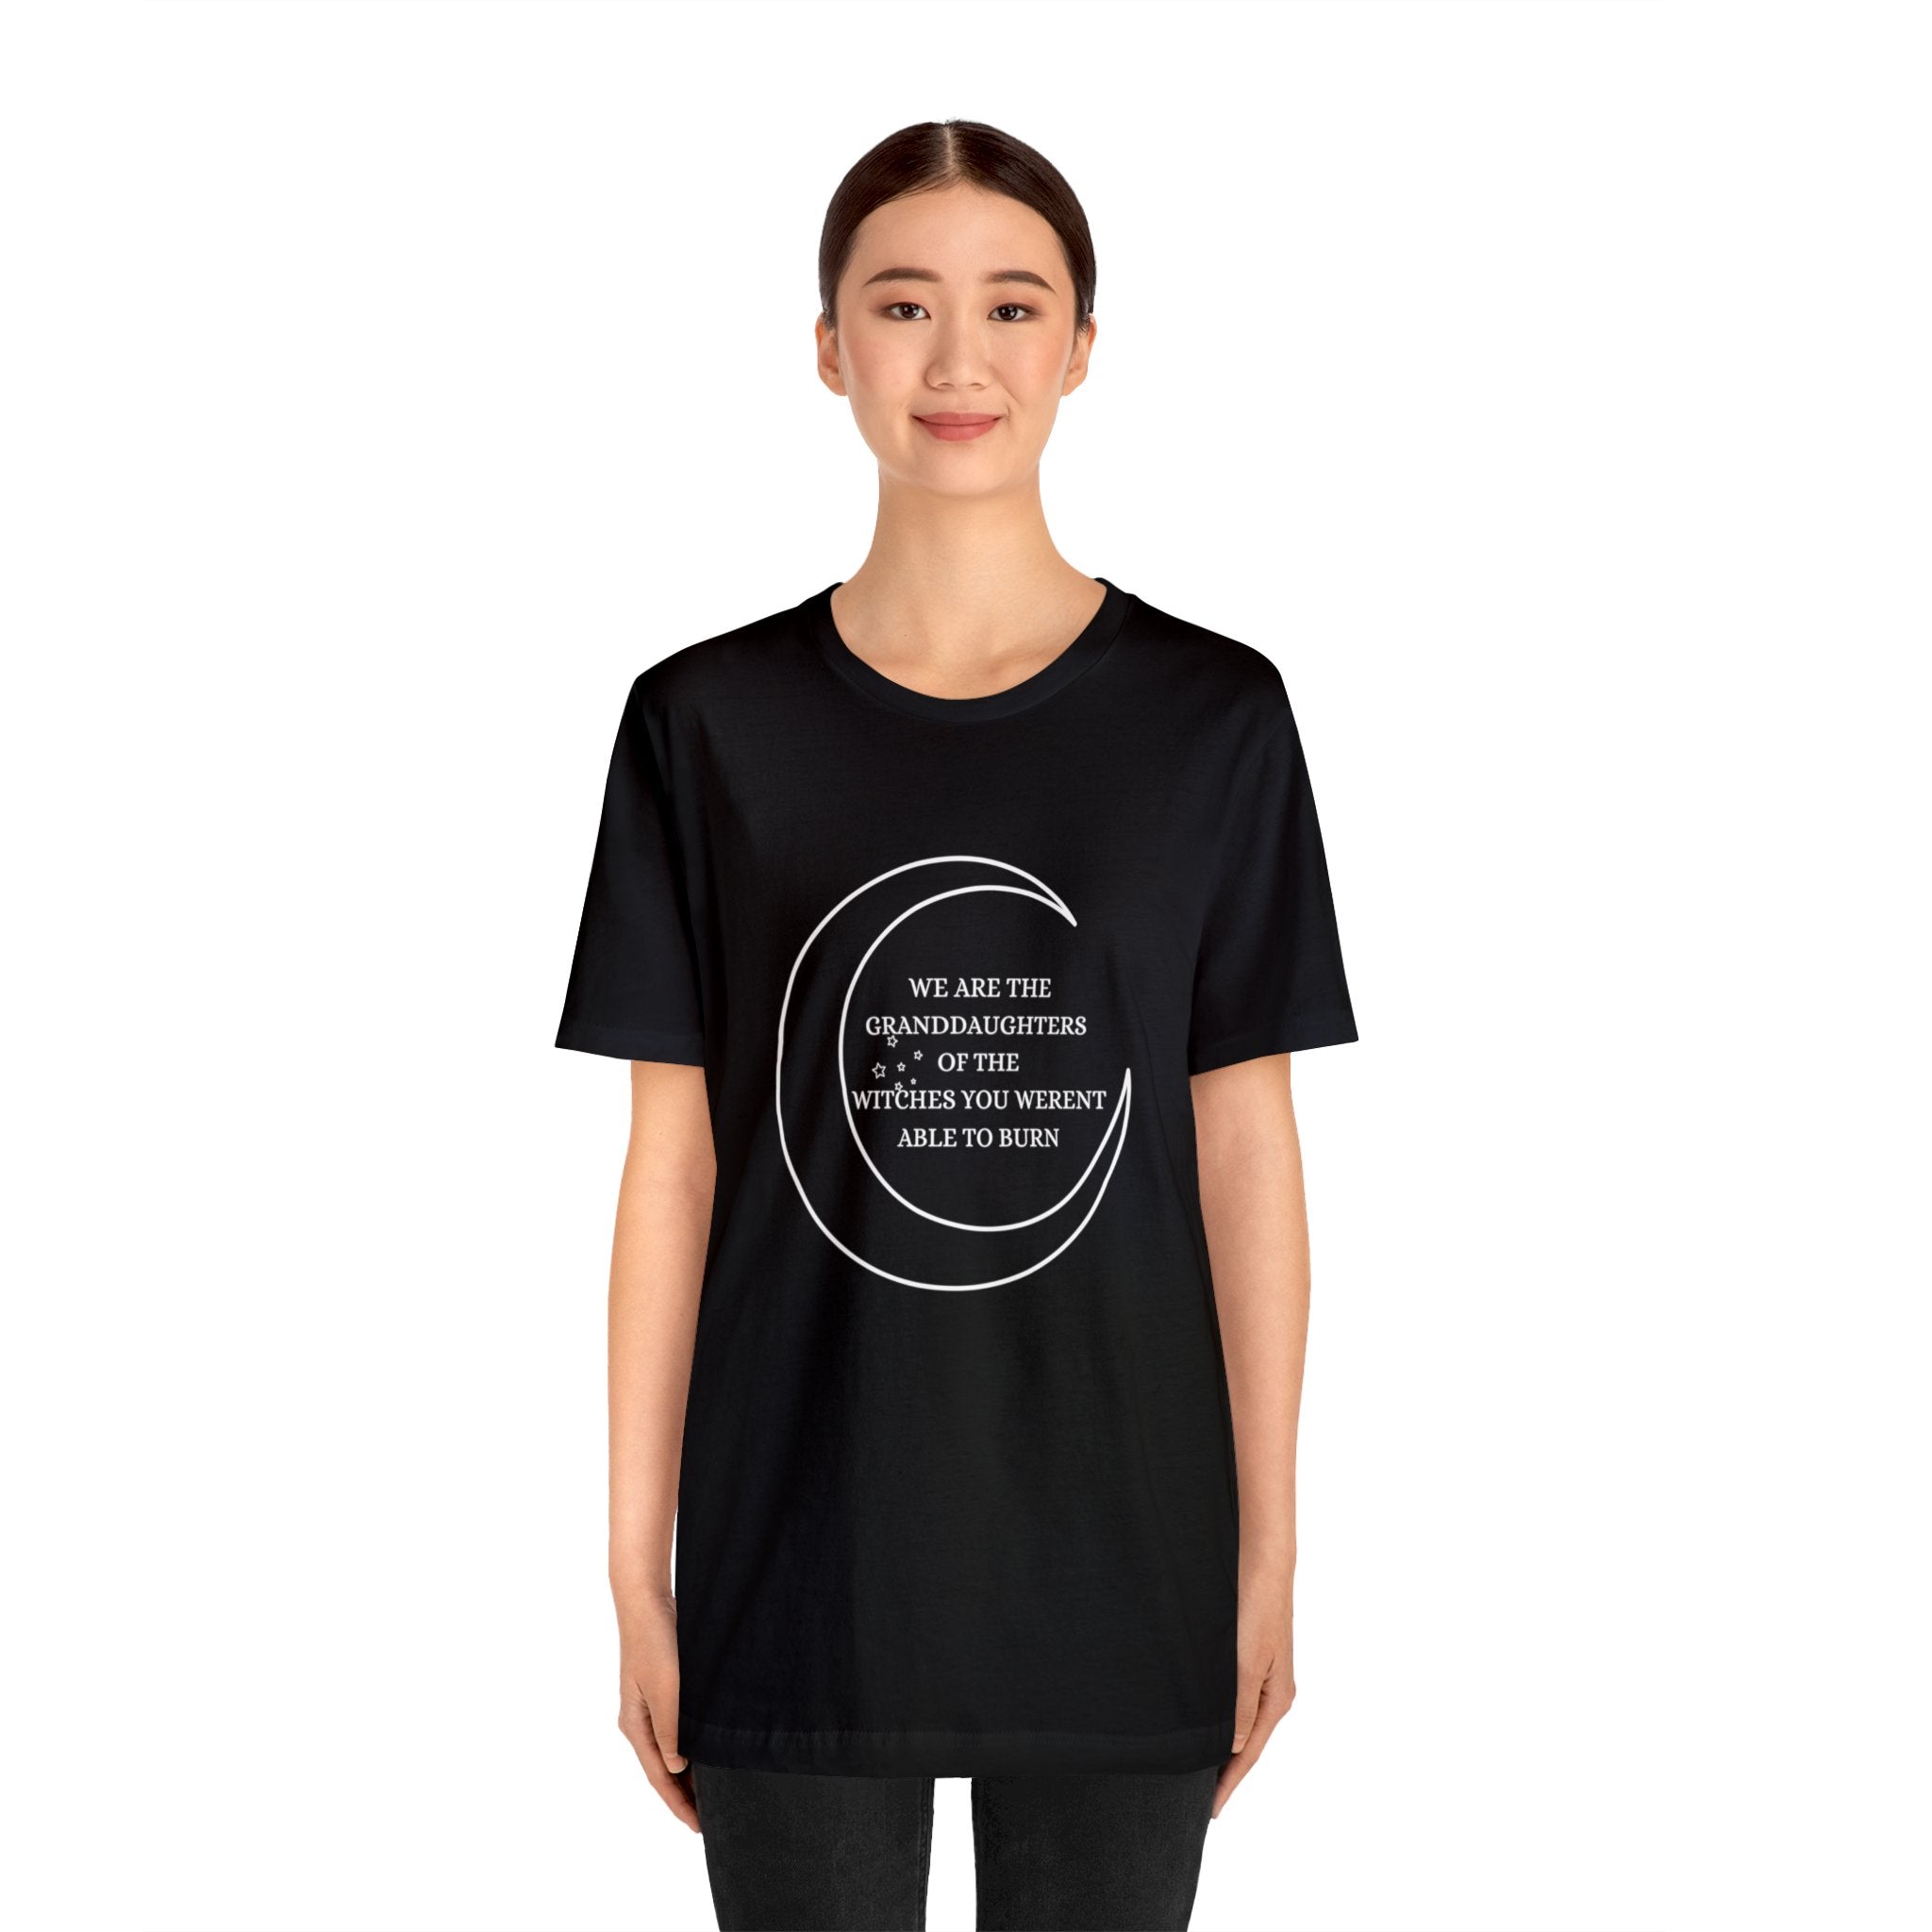 We Are The Granddaughters Of The Witches You Weren't Able To Burn T-shirt